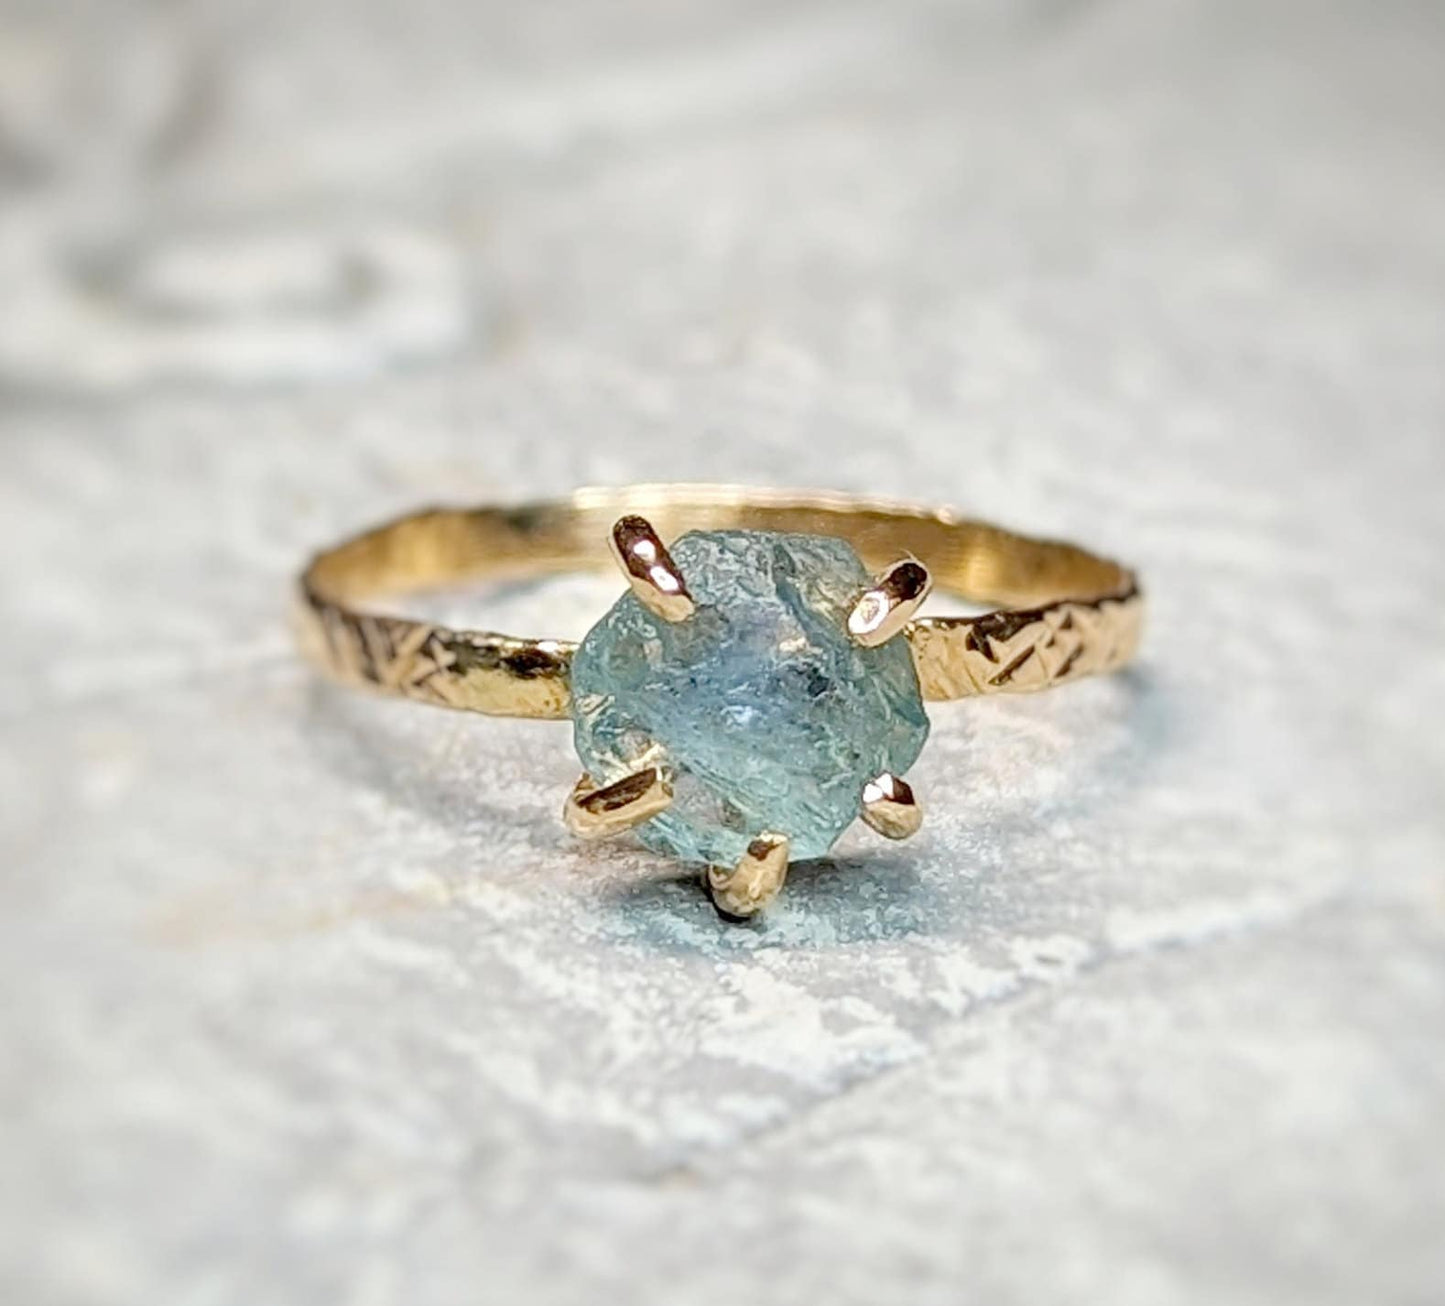 Raw Montana Sapphire Engagement Ring in 18k Gold